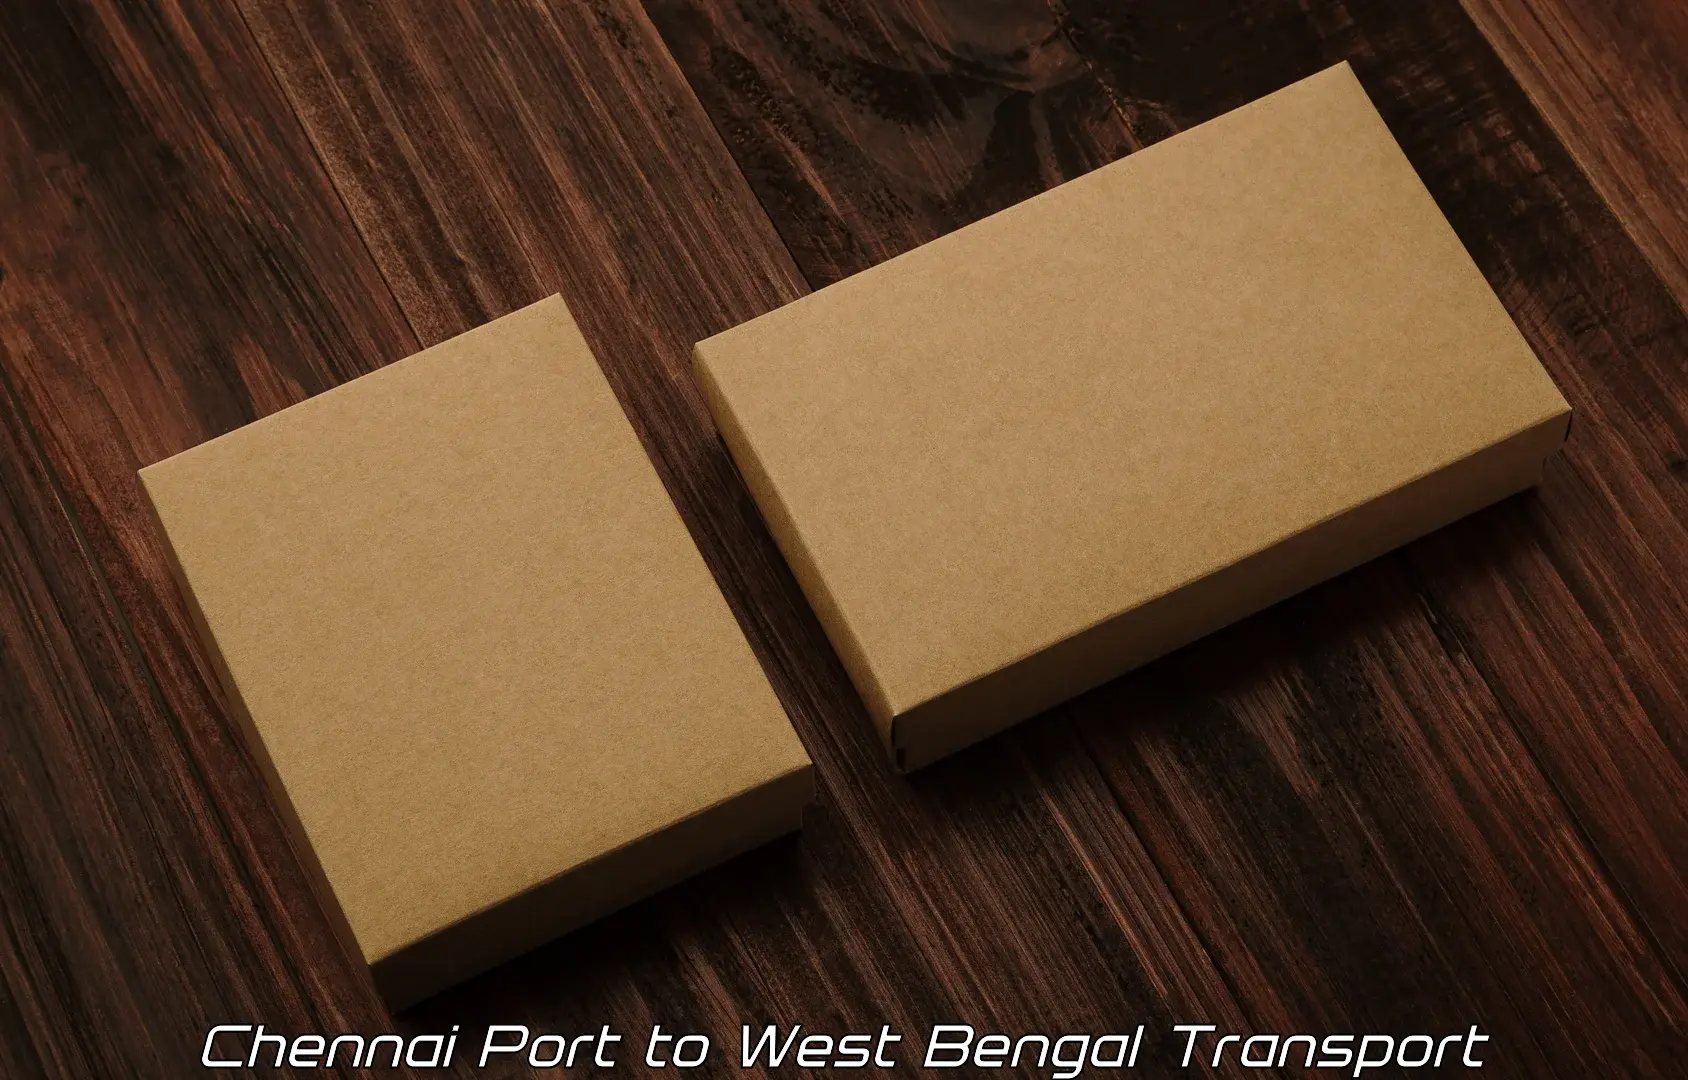 Road transport services in Chennai Port to Durgapur